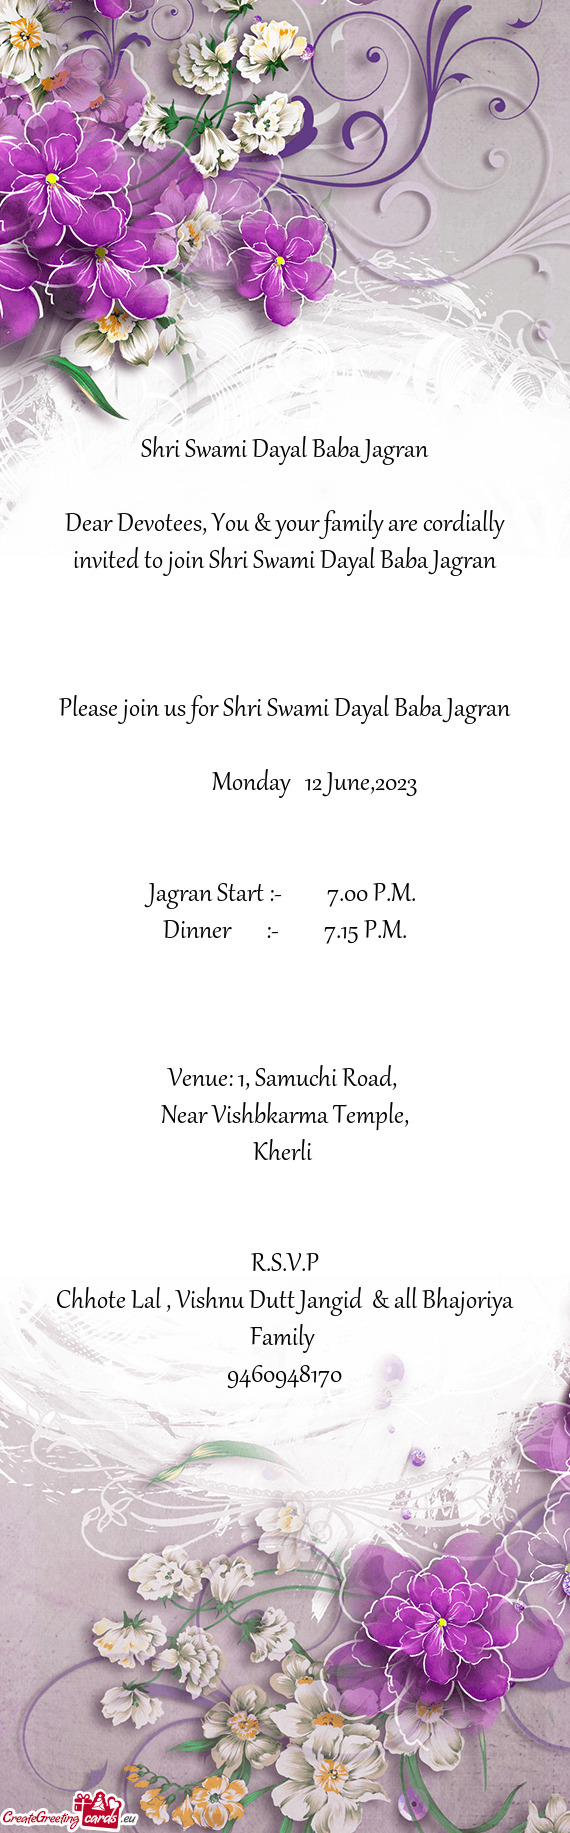 Dear Devotees, You & your family are cordially invited to join Shri Swami Dayal Baba Jagran